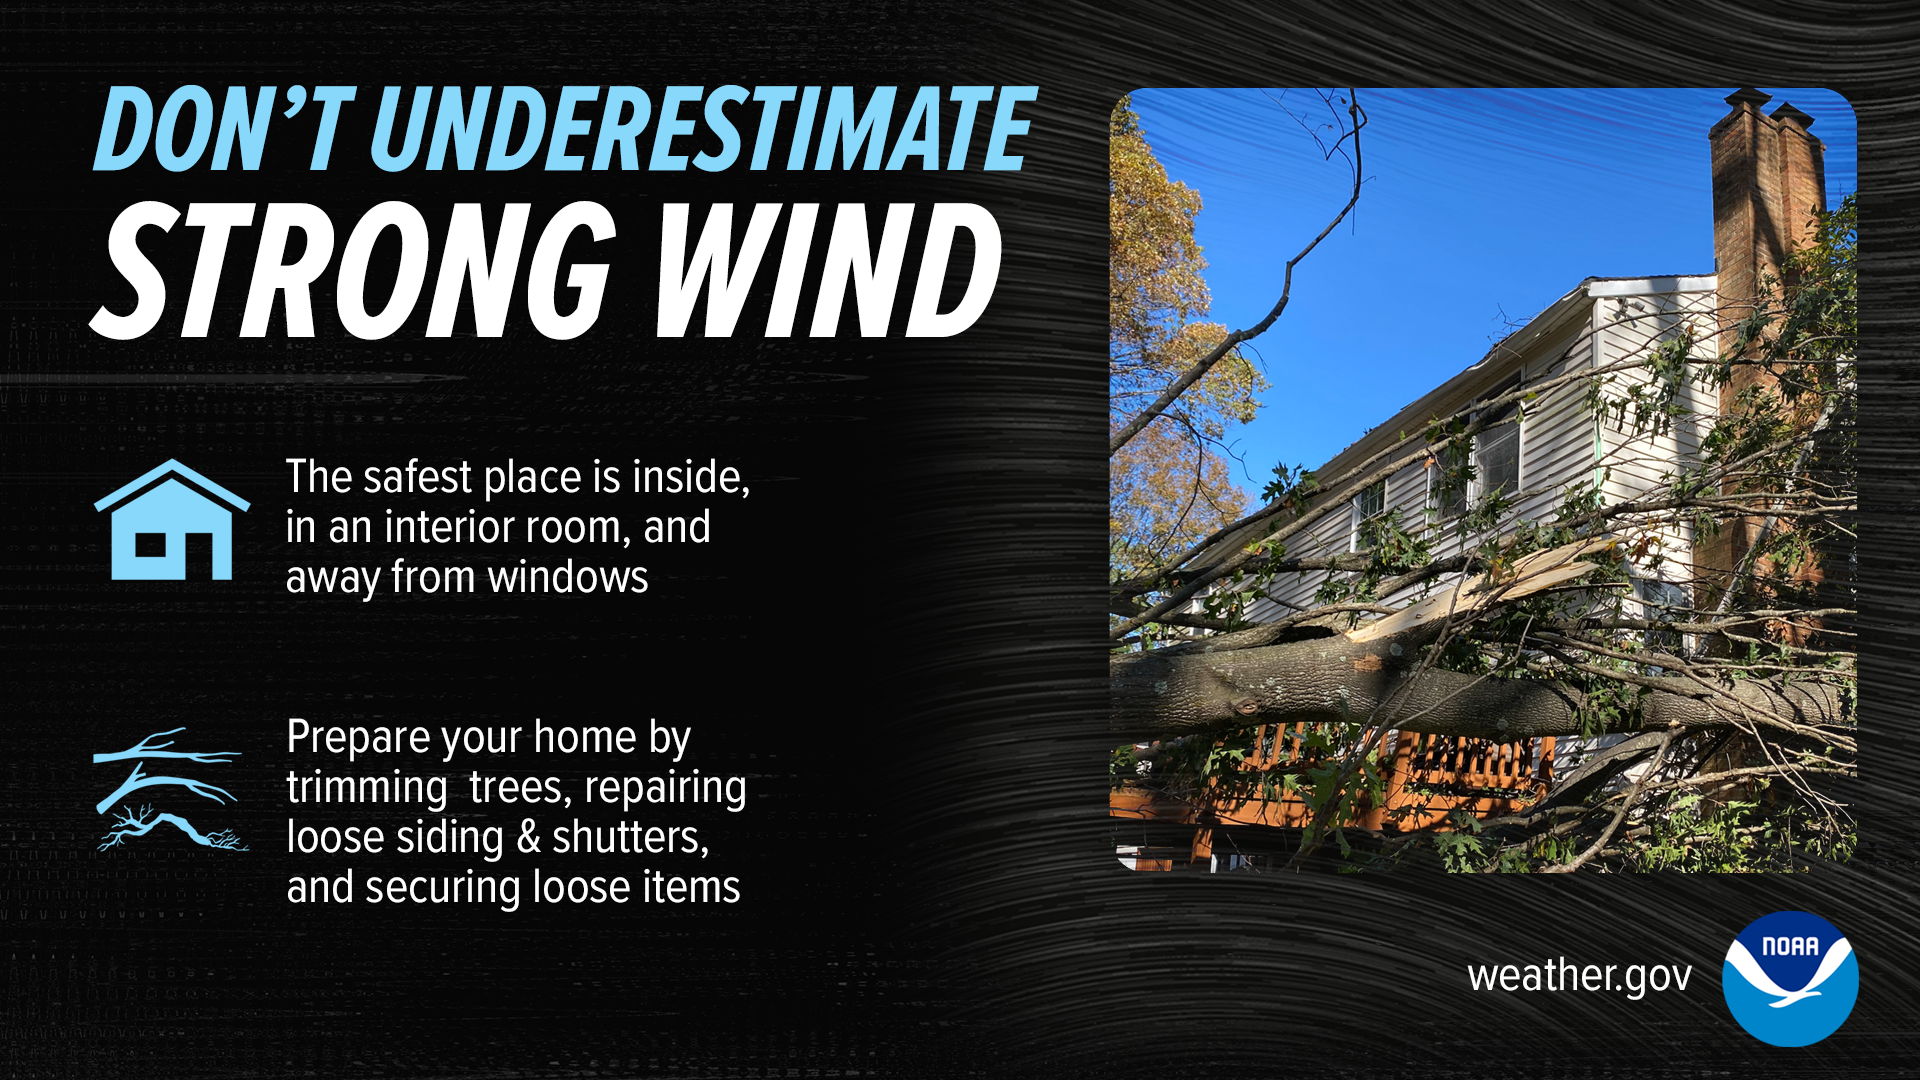 Don't Underestime Strong Wind. The safest place is inside, in an interior room, and away from windows. Prepare your home by trimming trees, repairing loose siding & shutters, and securing loose items.